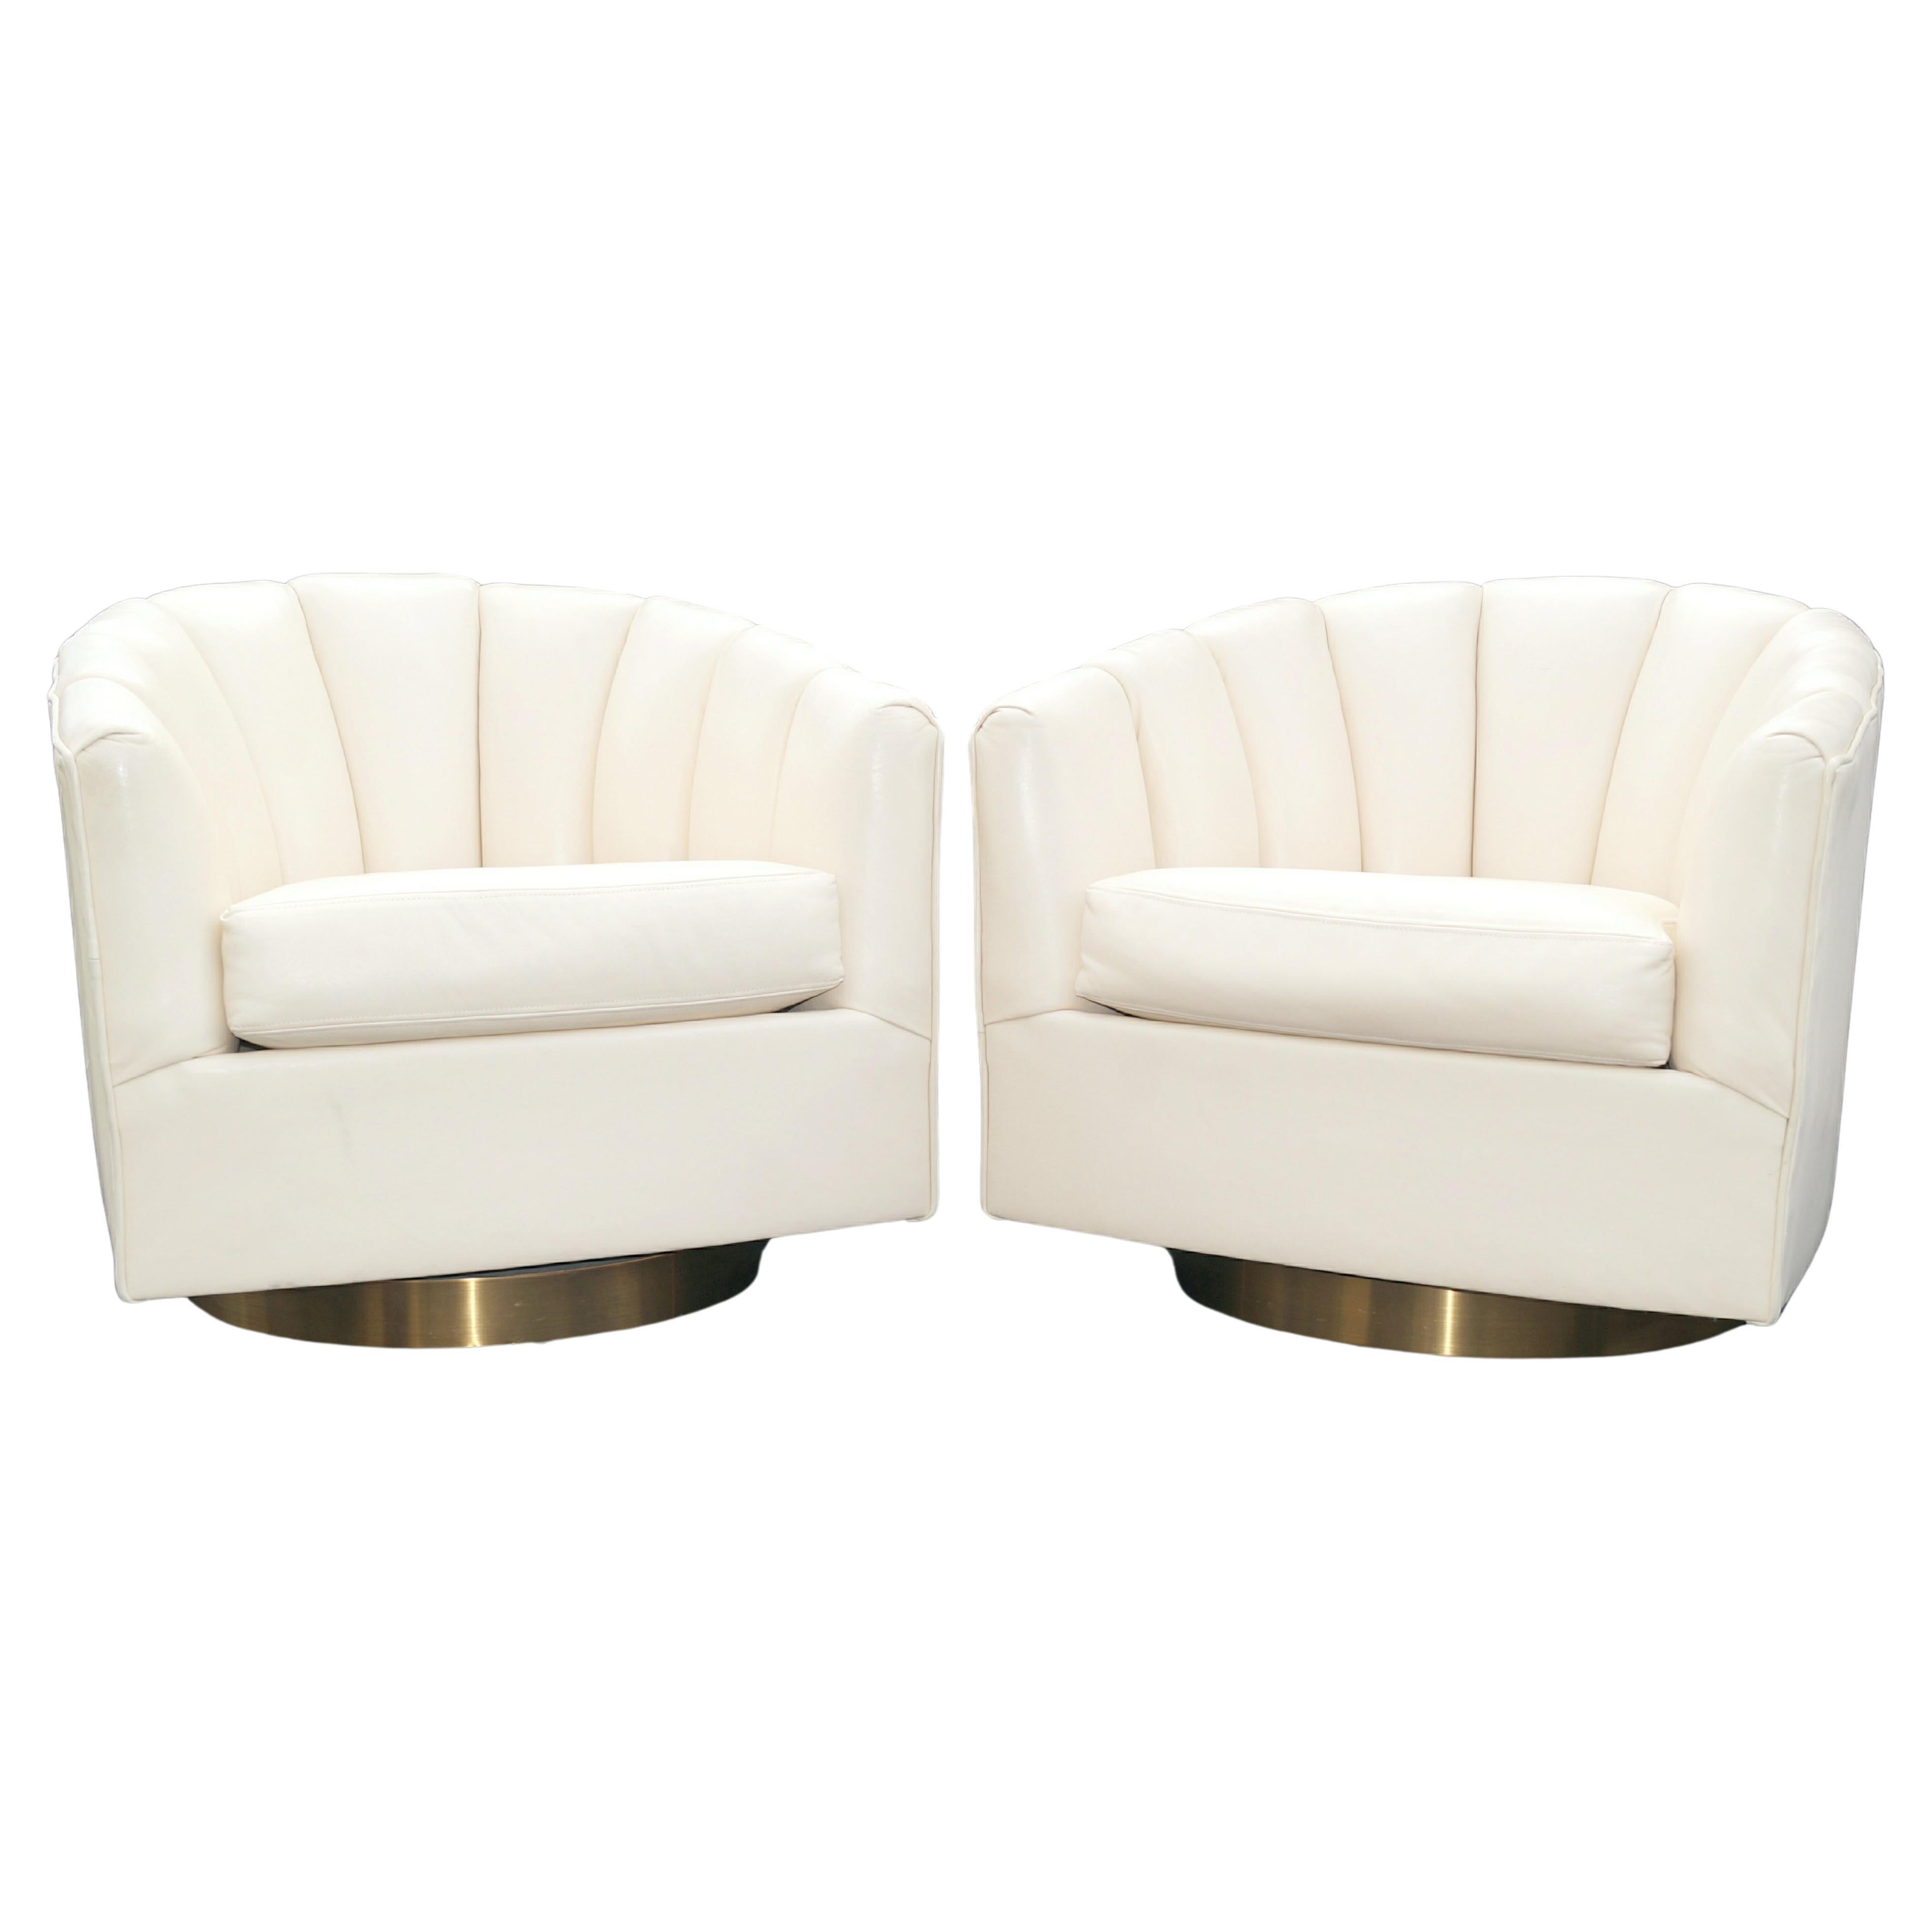 Pair Milo Baughman Style Brass Base Swivel Lounge Chairs 2 Pairs available For Sale